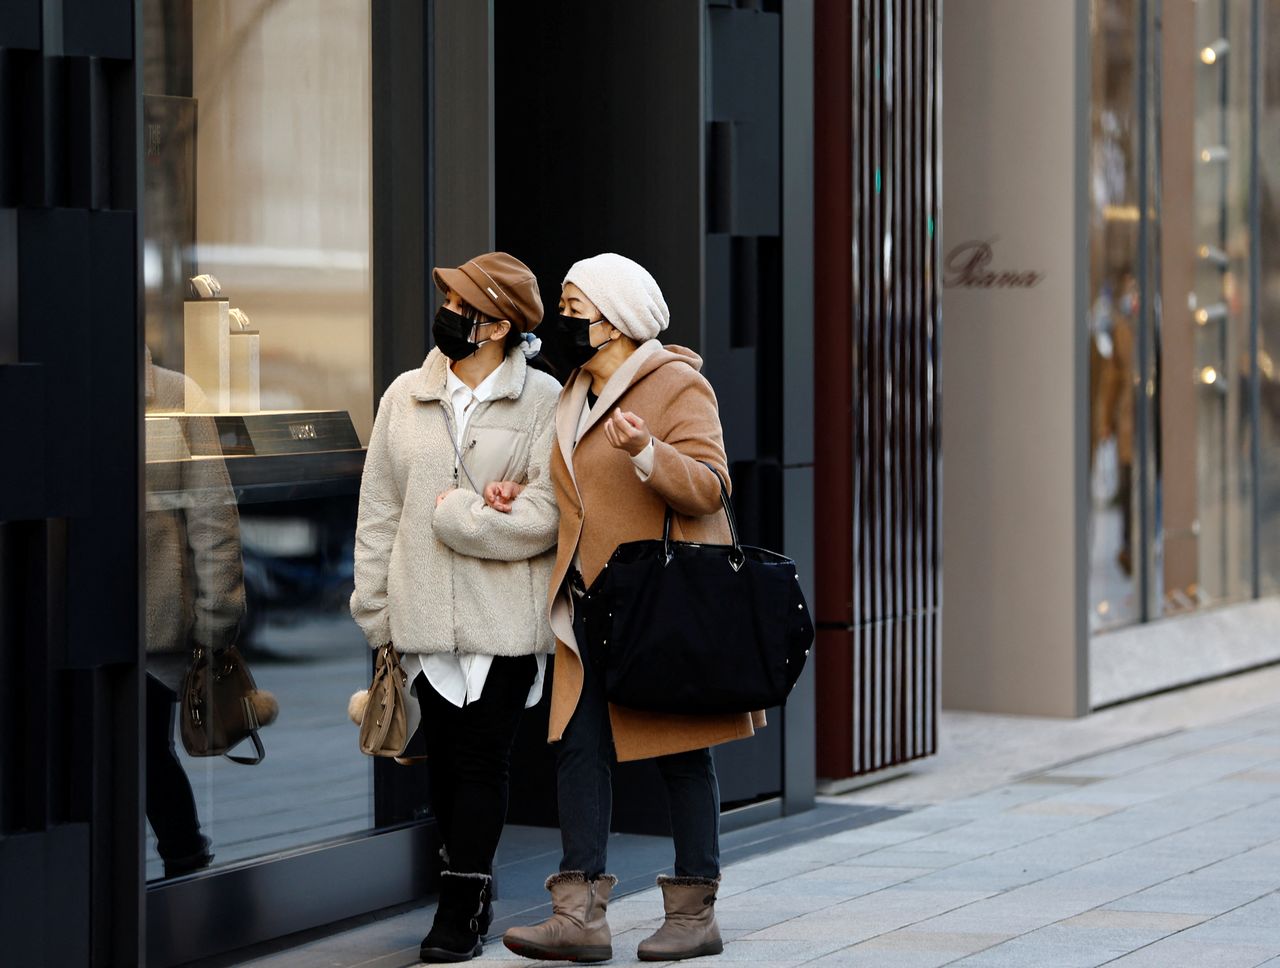 Women wearing protective masks look at the shop window of a luxury brand, amid the coronavirus disease (COVID-19) pandemic, at a shopping district in Tokyo, Japan, February 15, 2022. REUTERS/Kim Kyung-Hoon